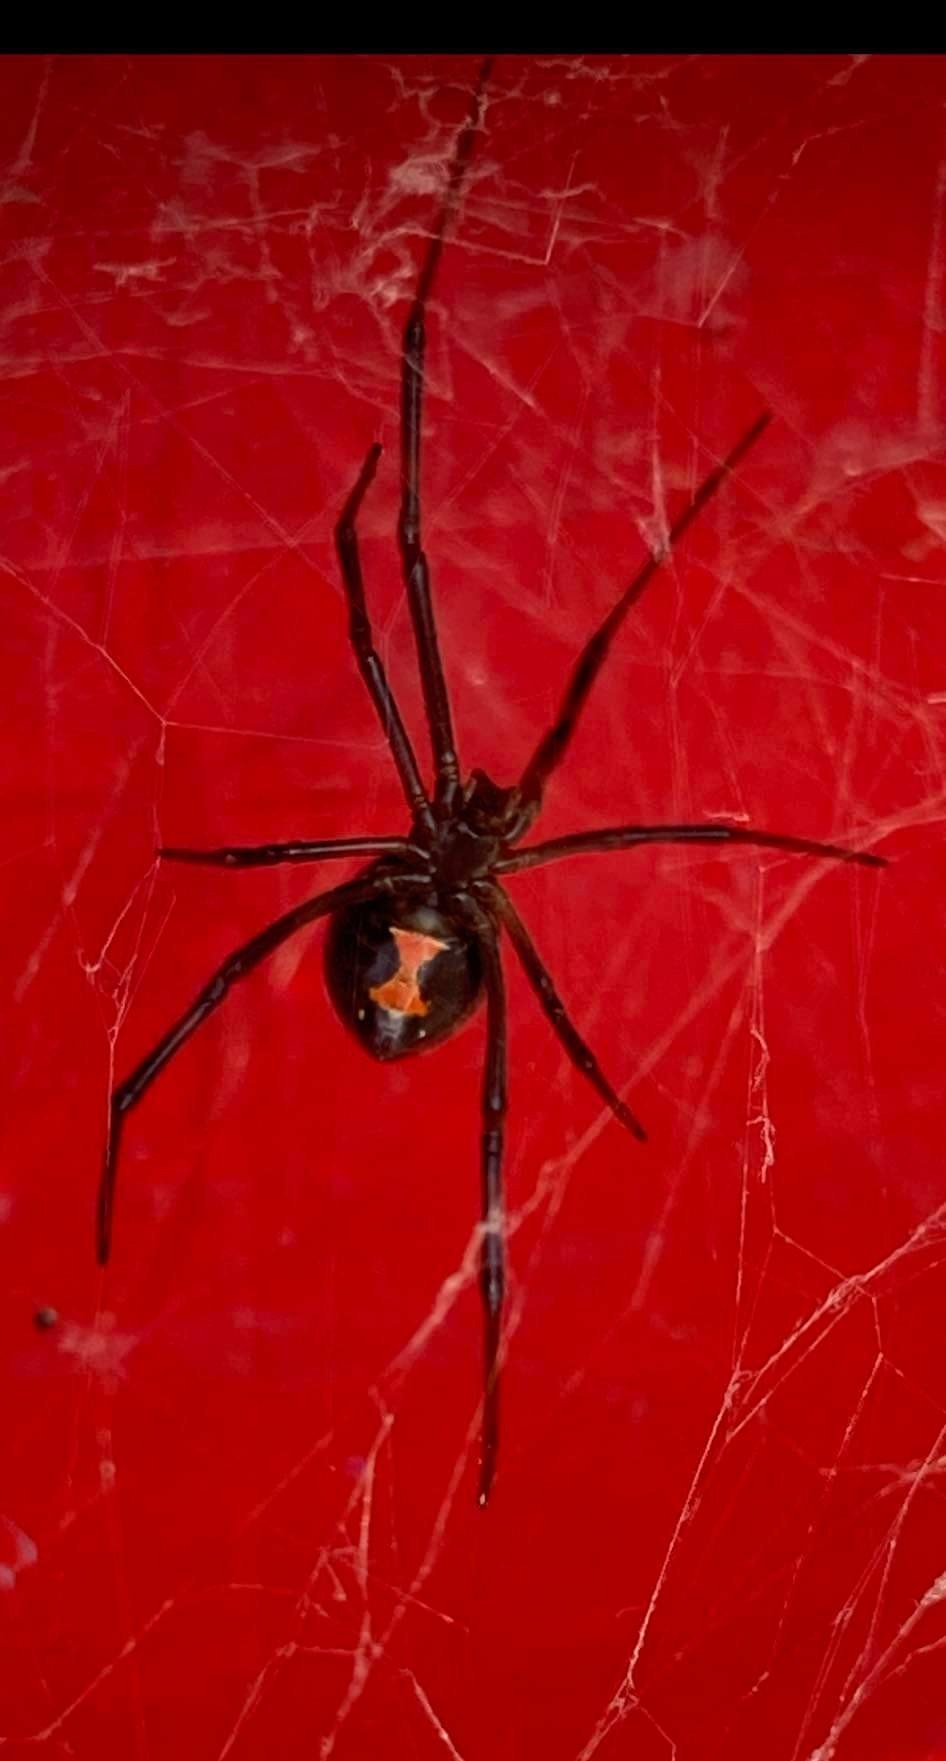 News stories have caught spiders in a web of misinformation